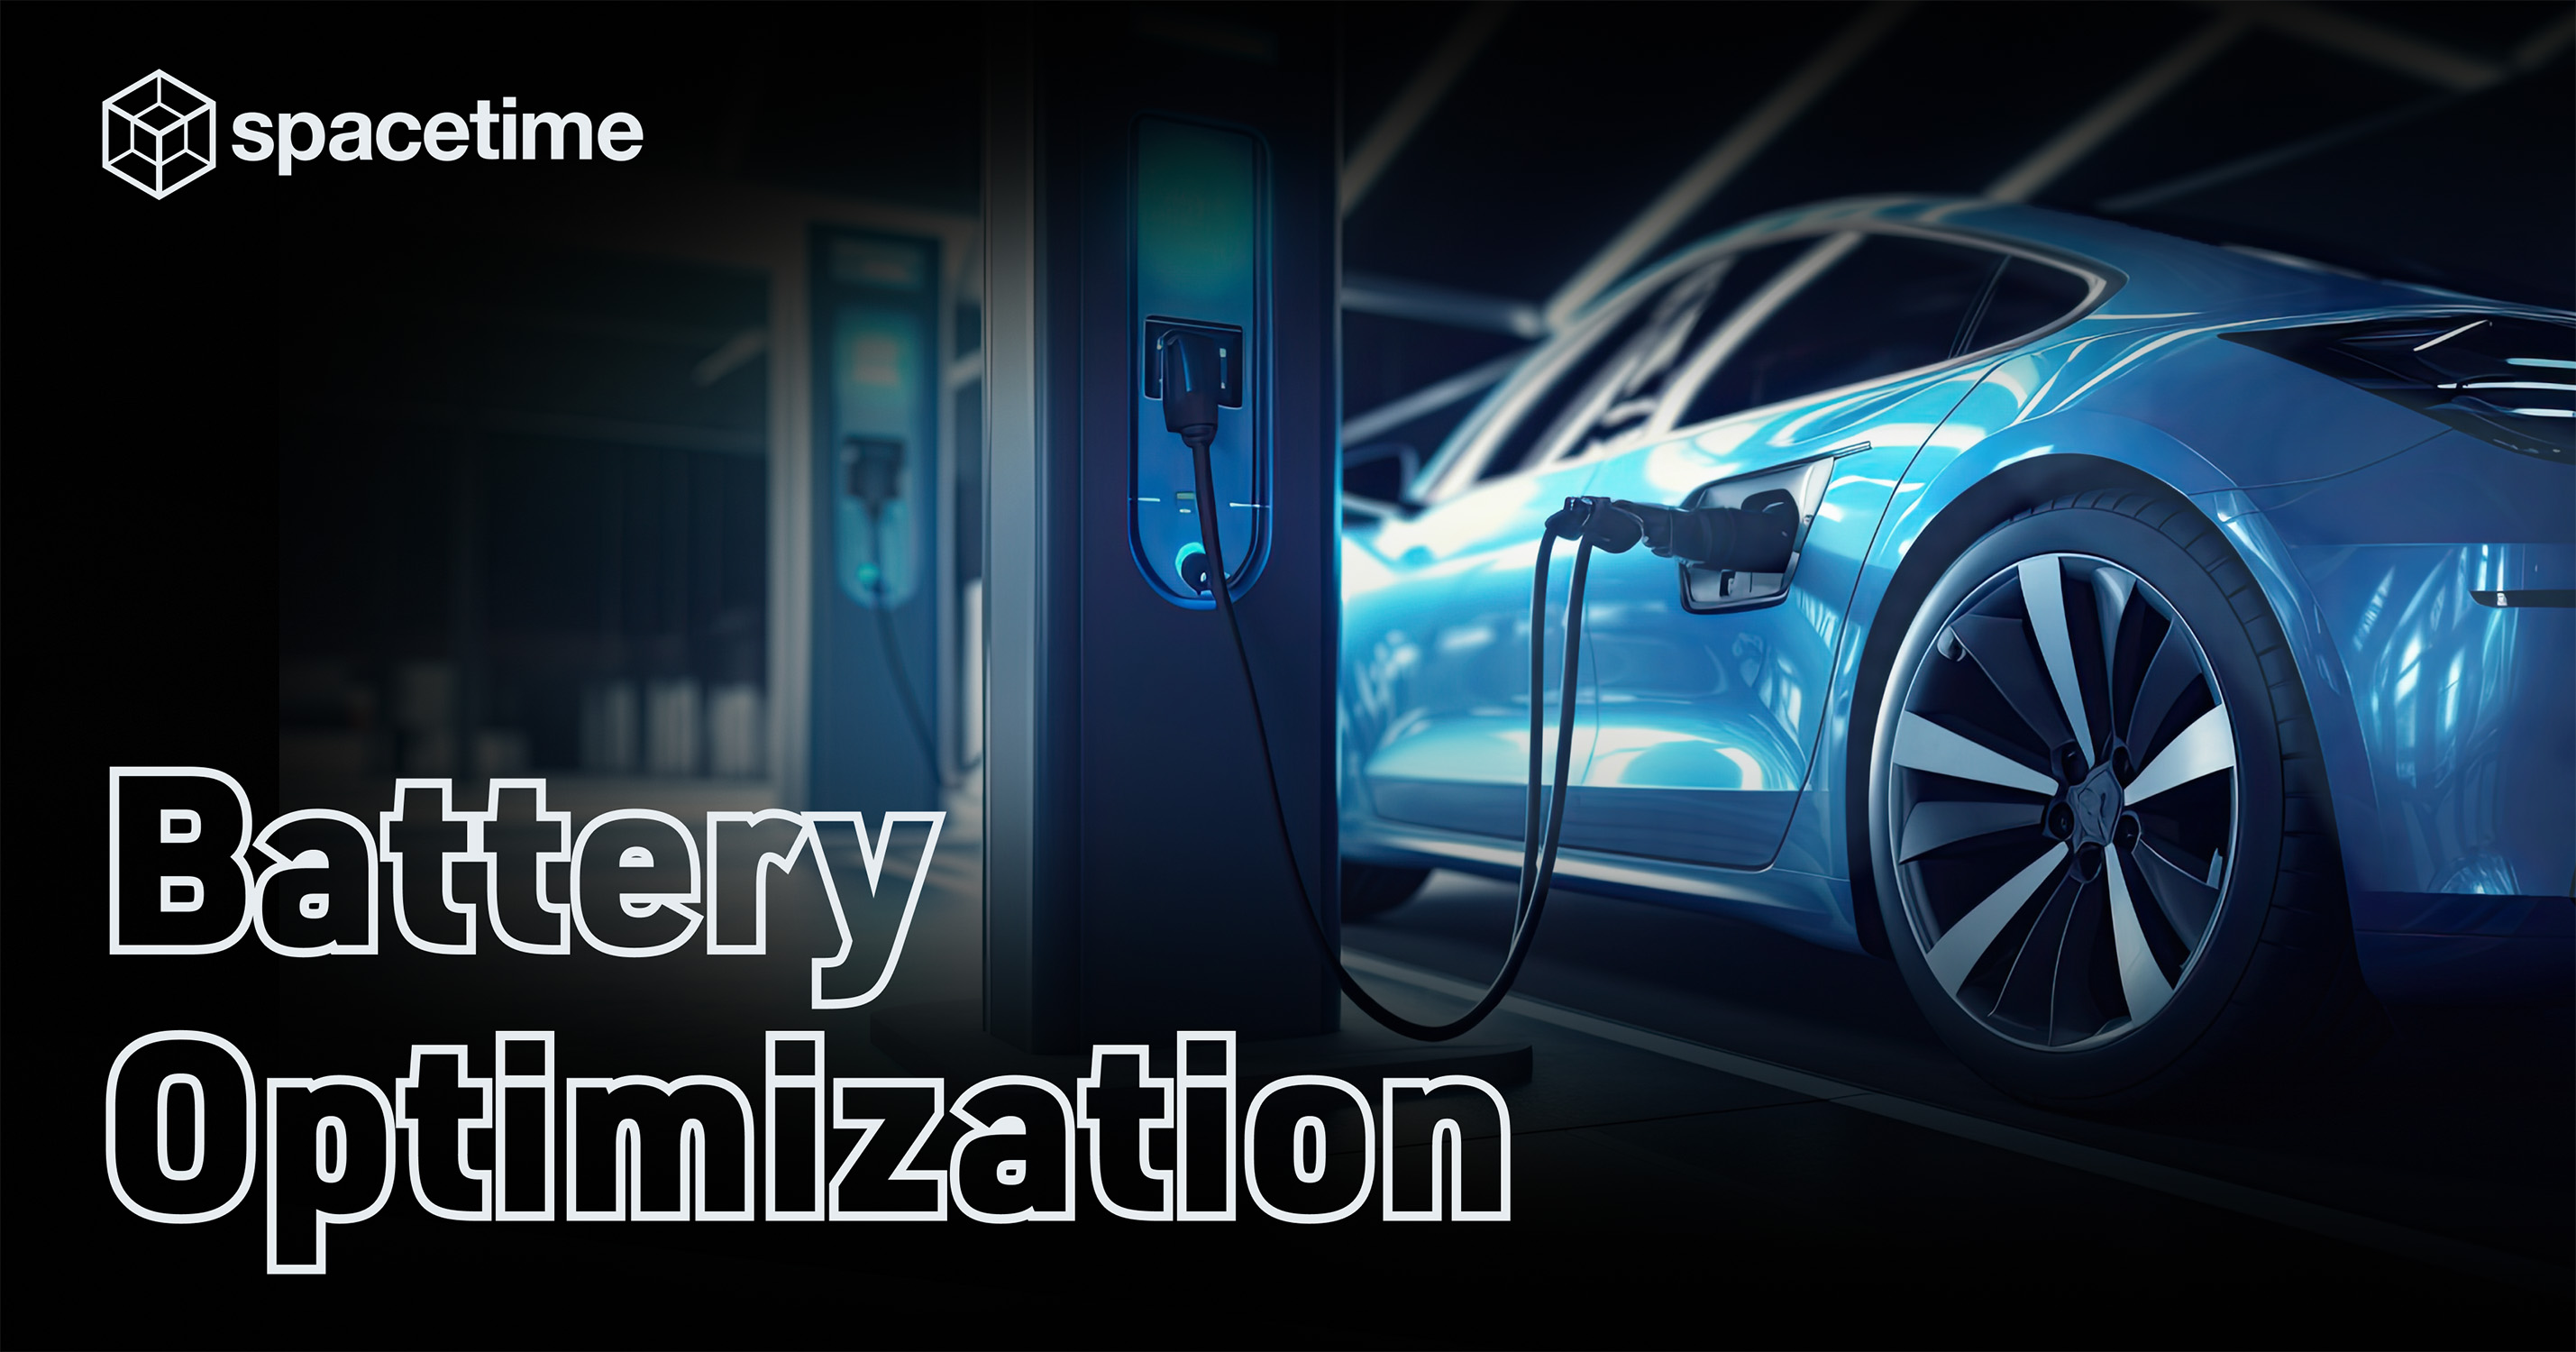 Blue electric vehicle charging at a station – optimizing charging cycles